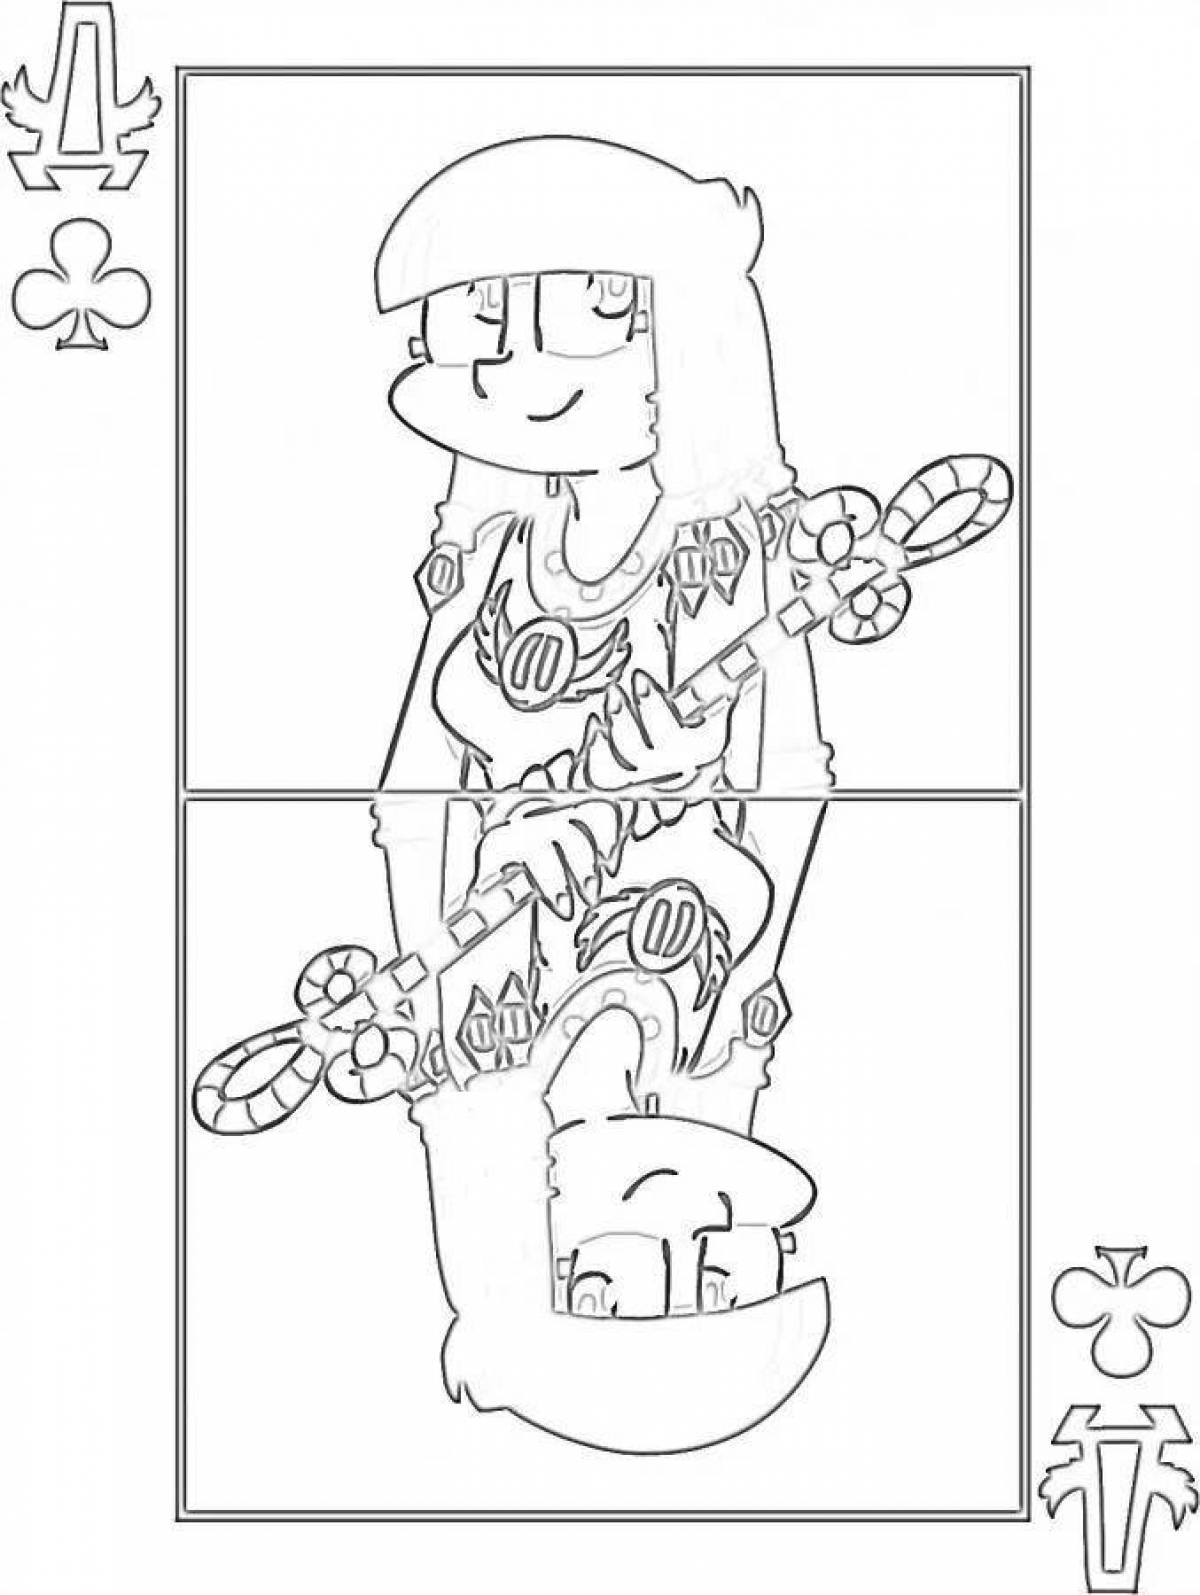 Humorous coloring page 13